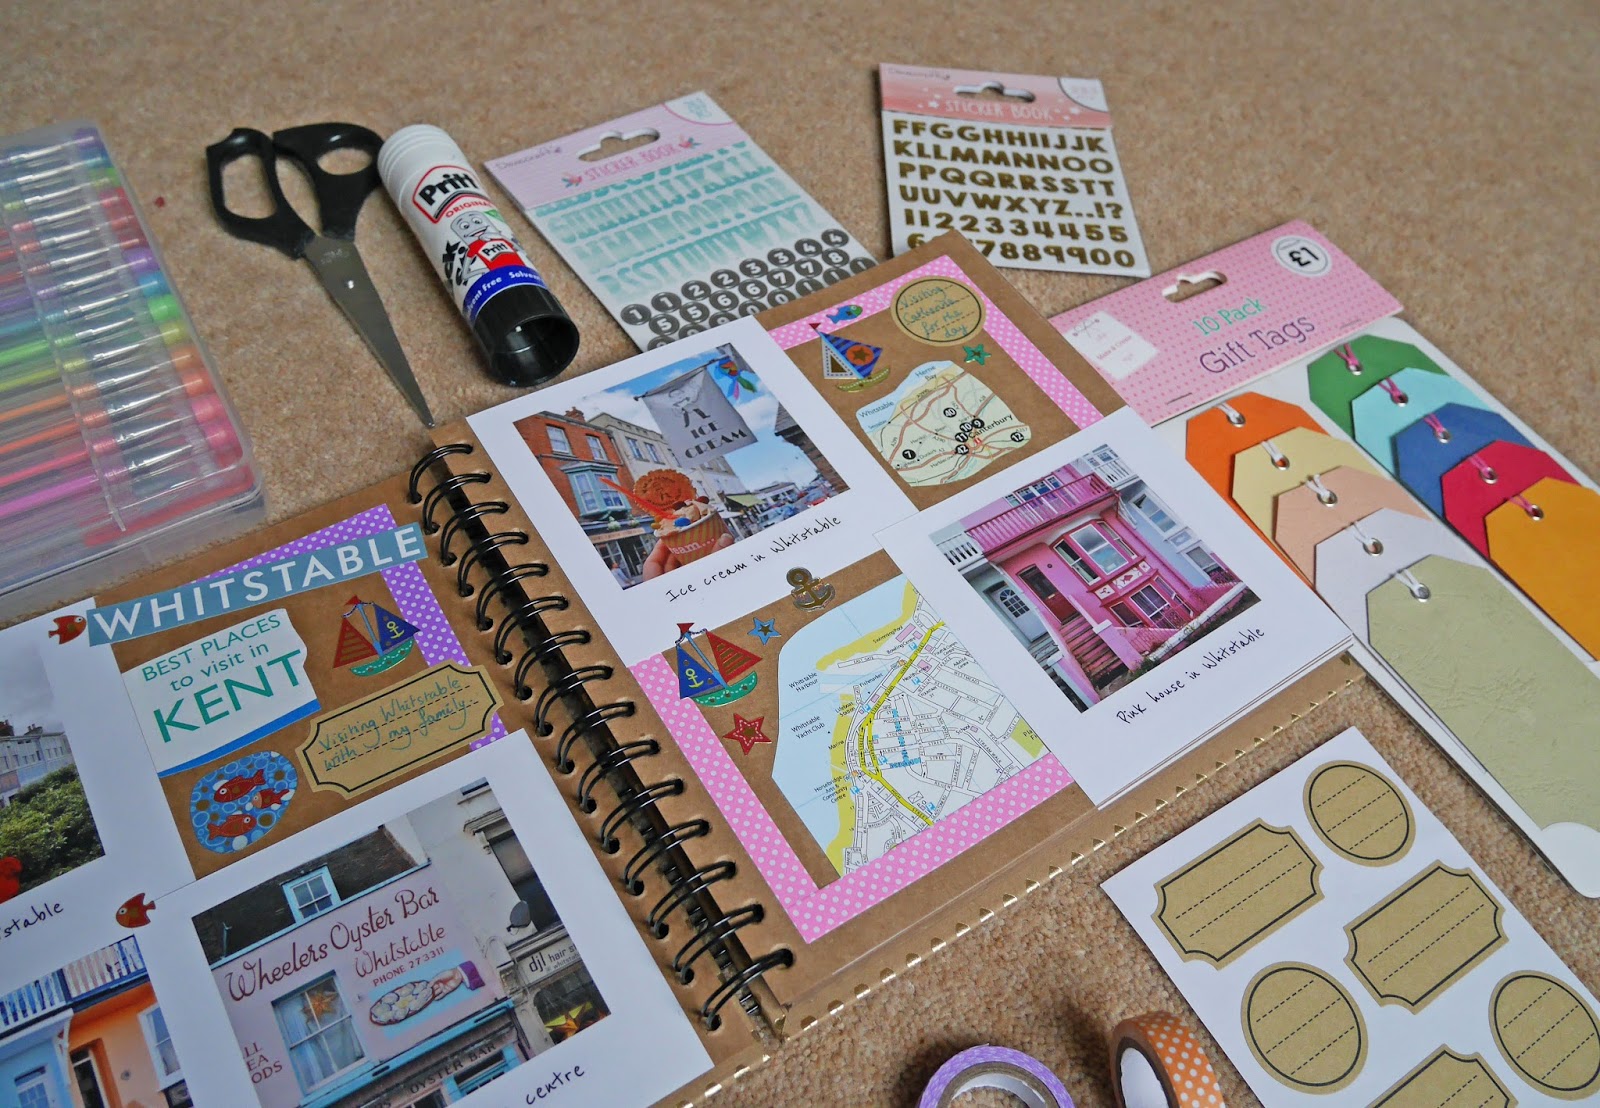 Scrapbooking starter kit for beginners - luggage tags and labels